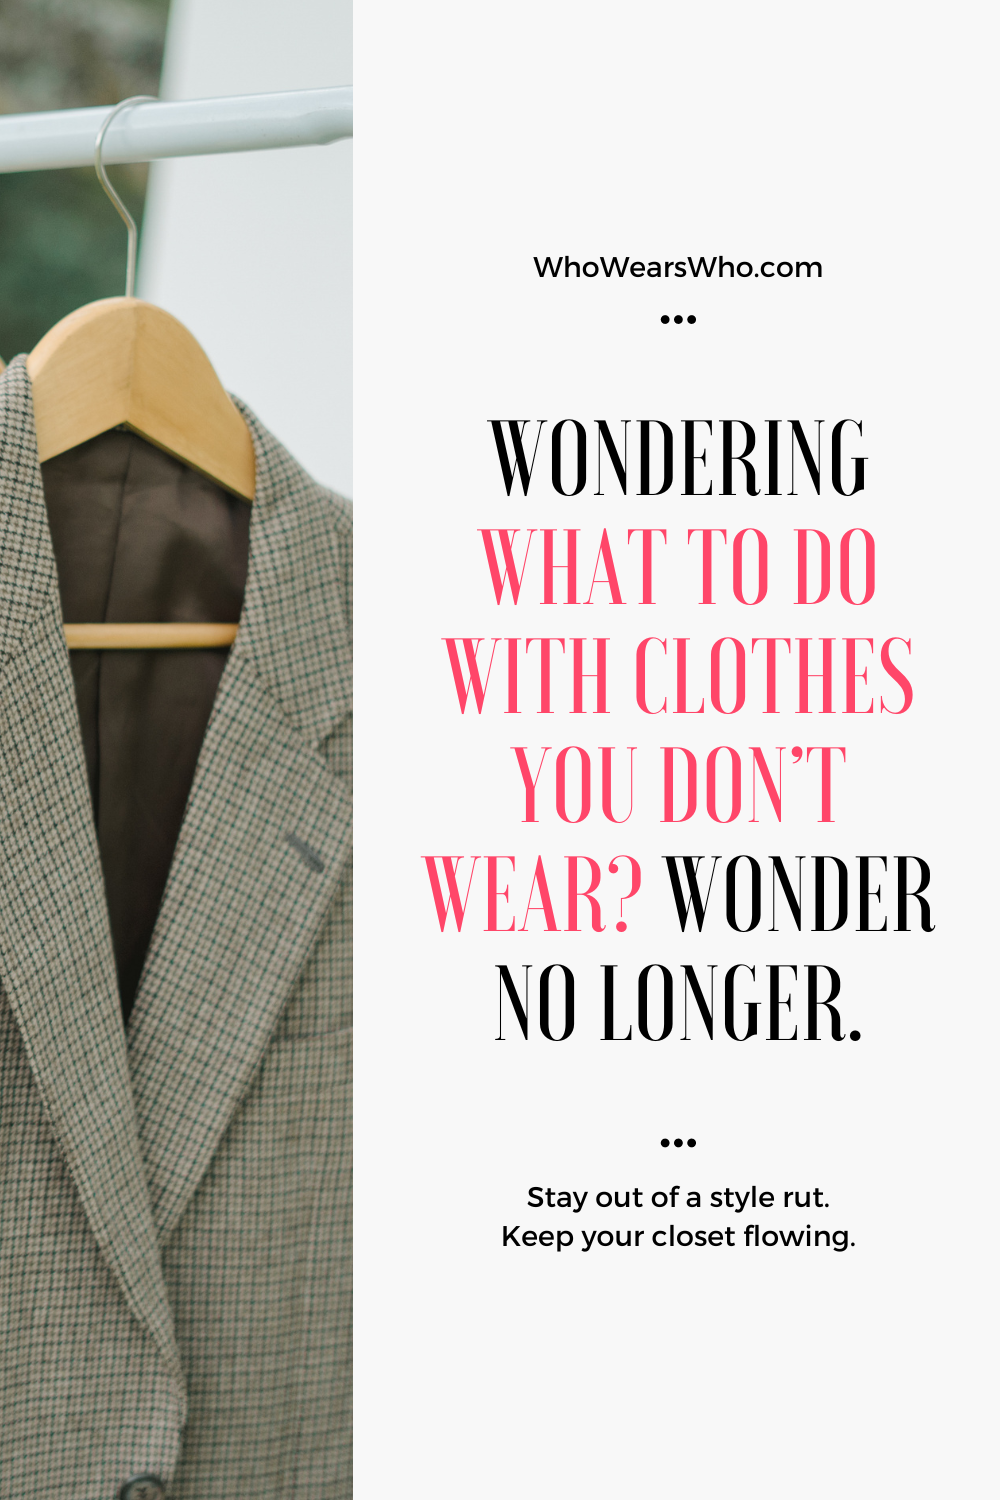 What to do with clothes you don’t wear Blog